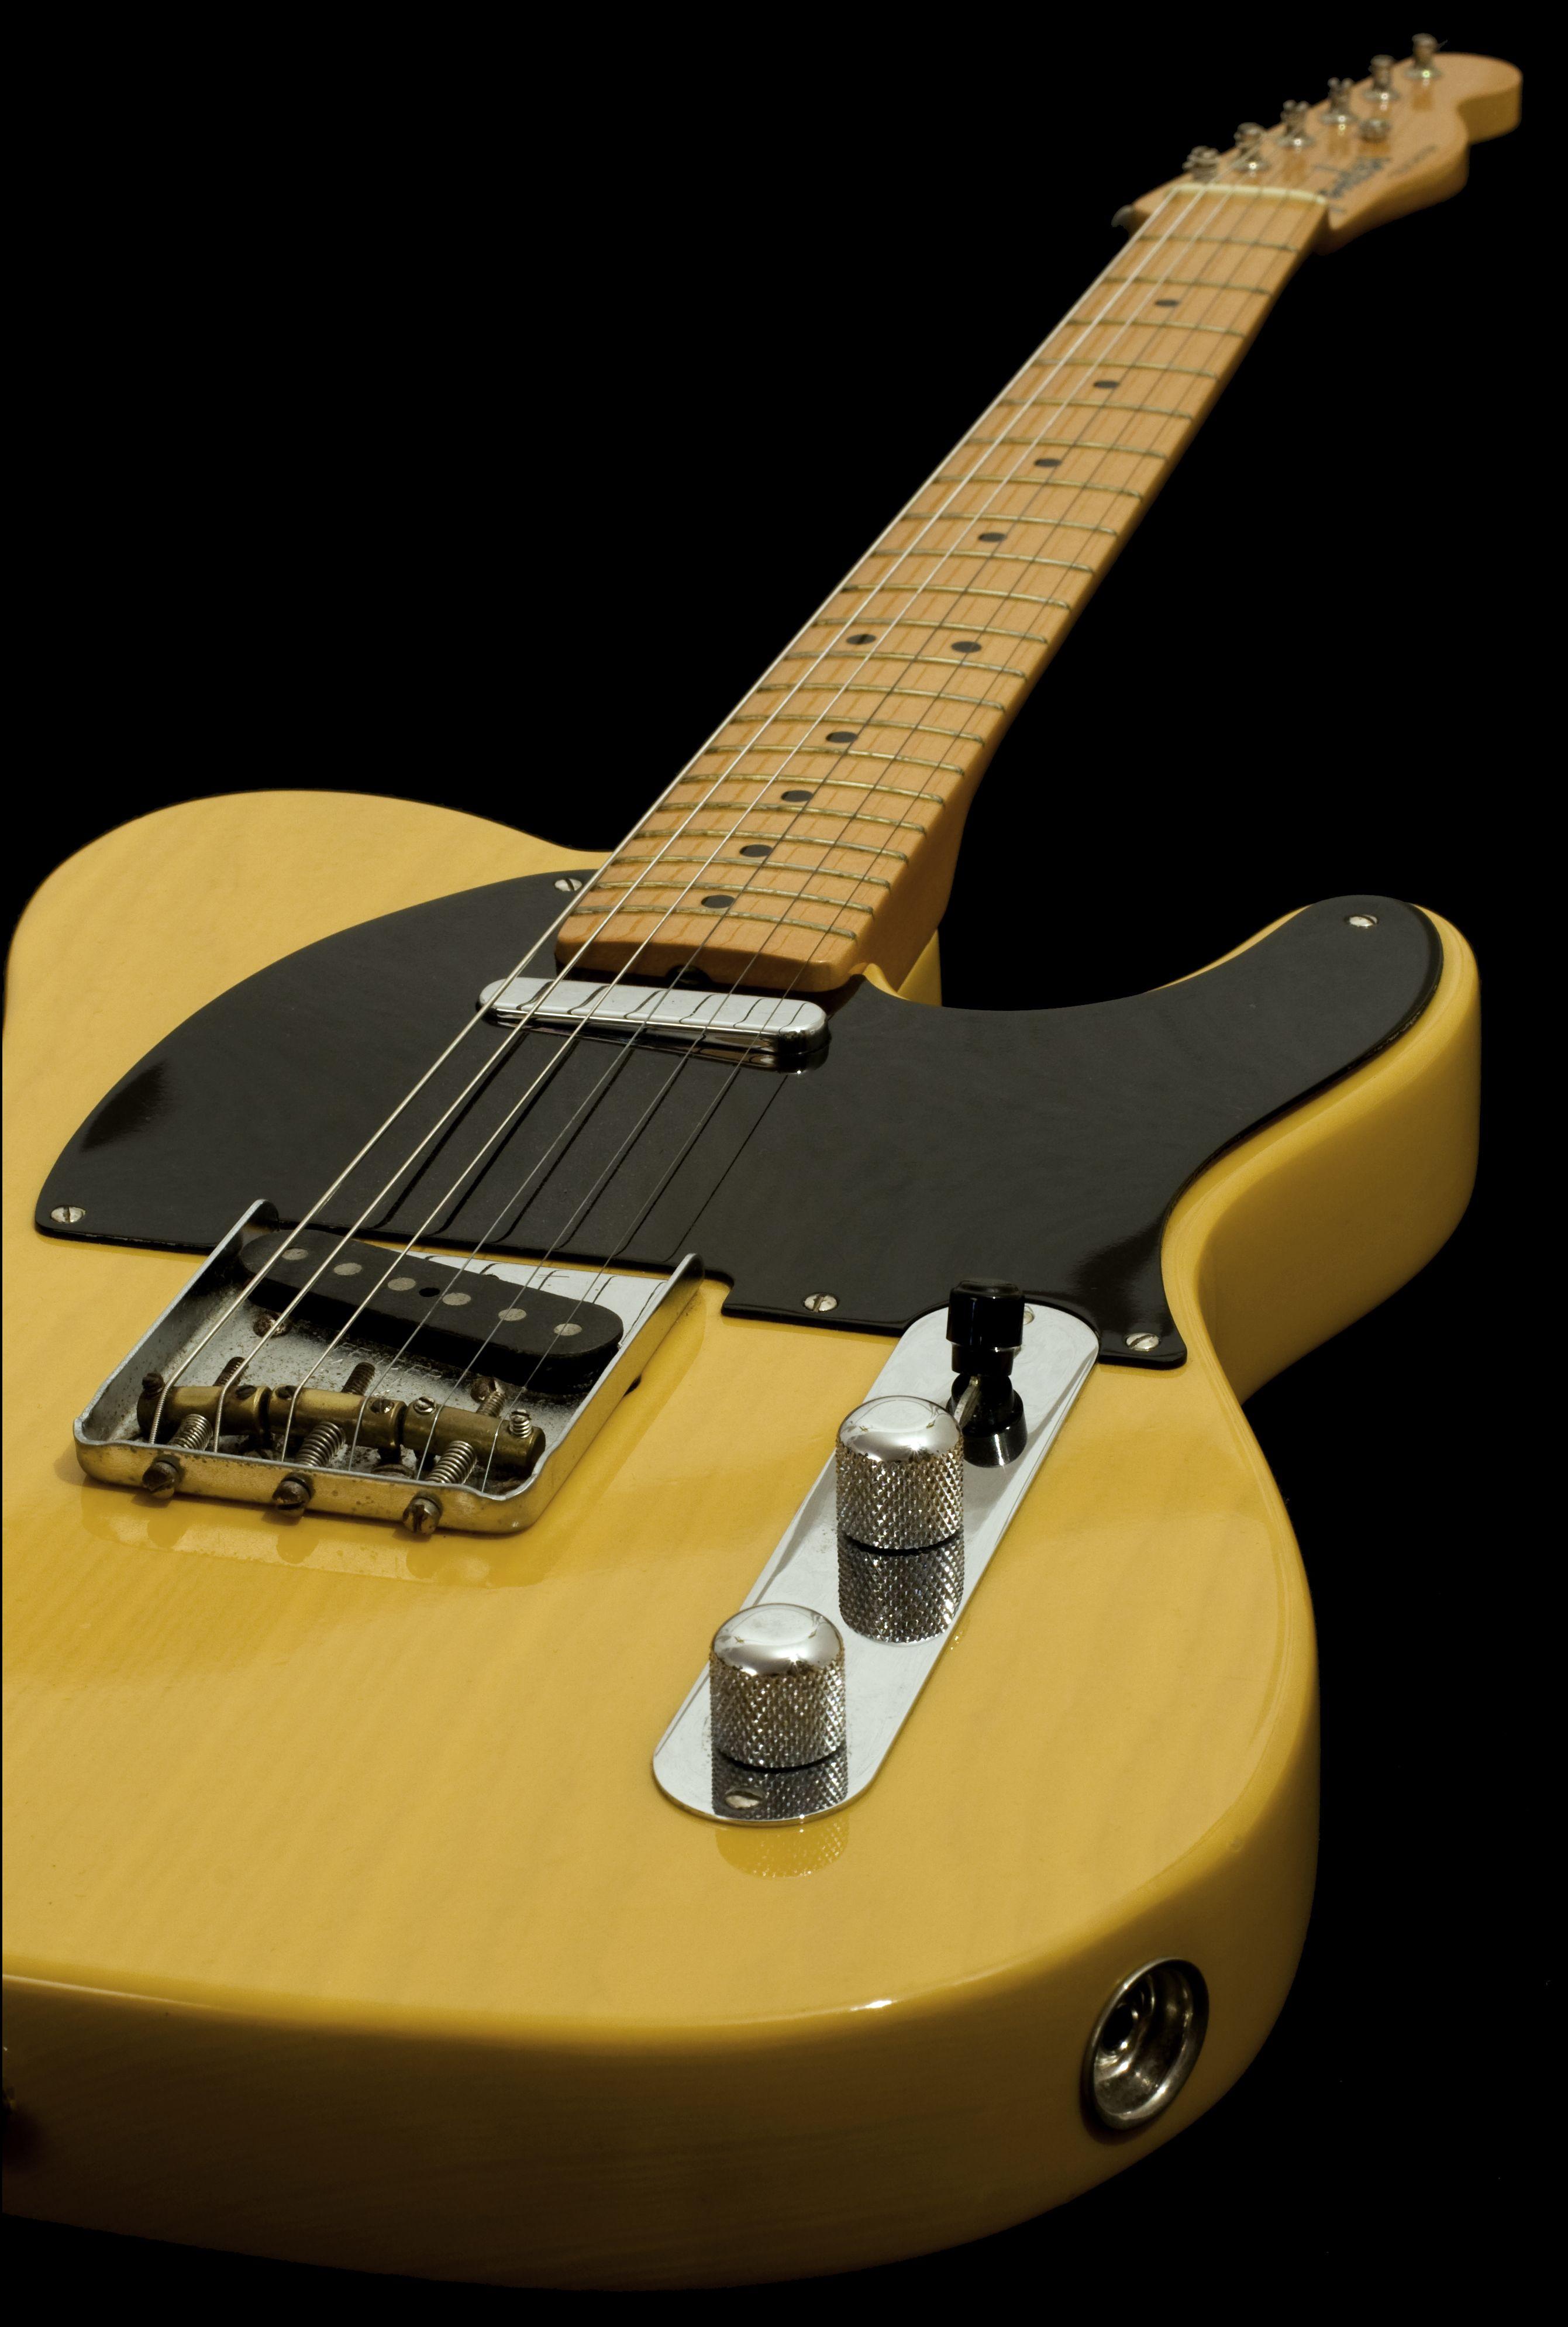 Telecaster Wallpapers Top Free Telecaster Backgrounds Wallpaperaccess